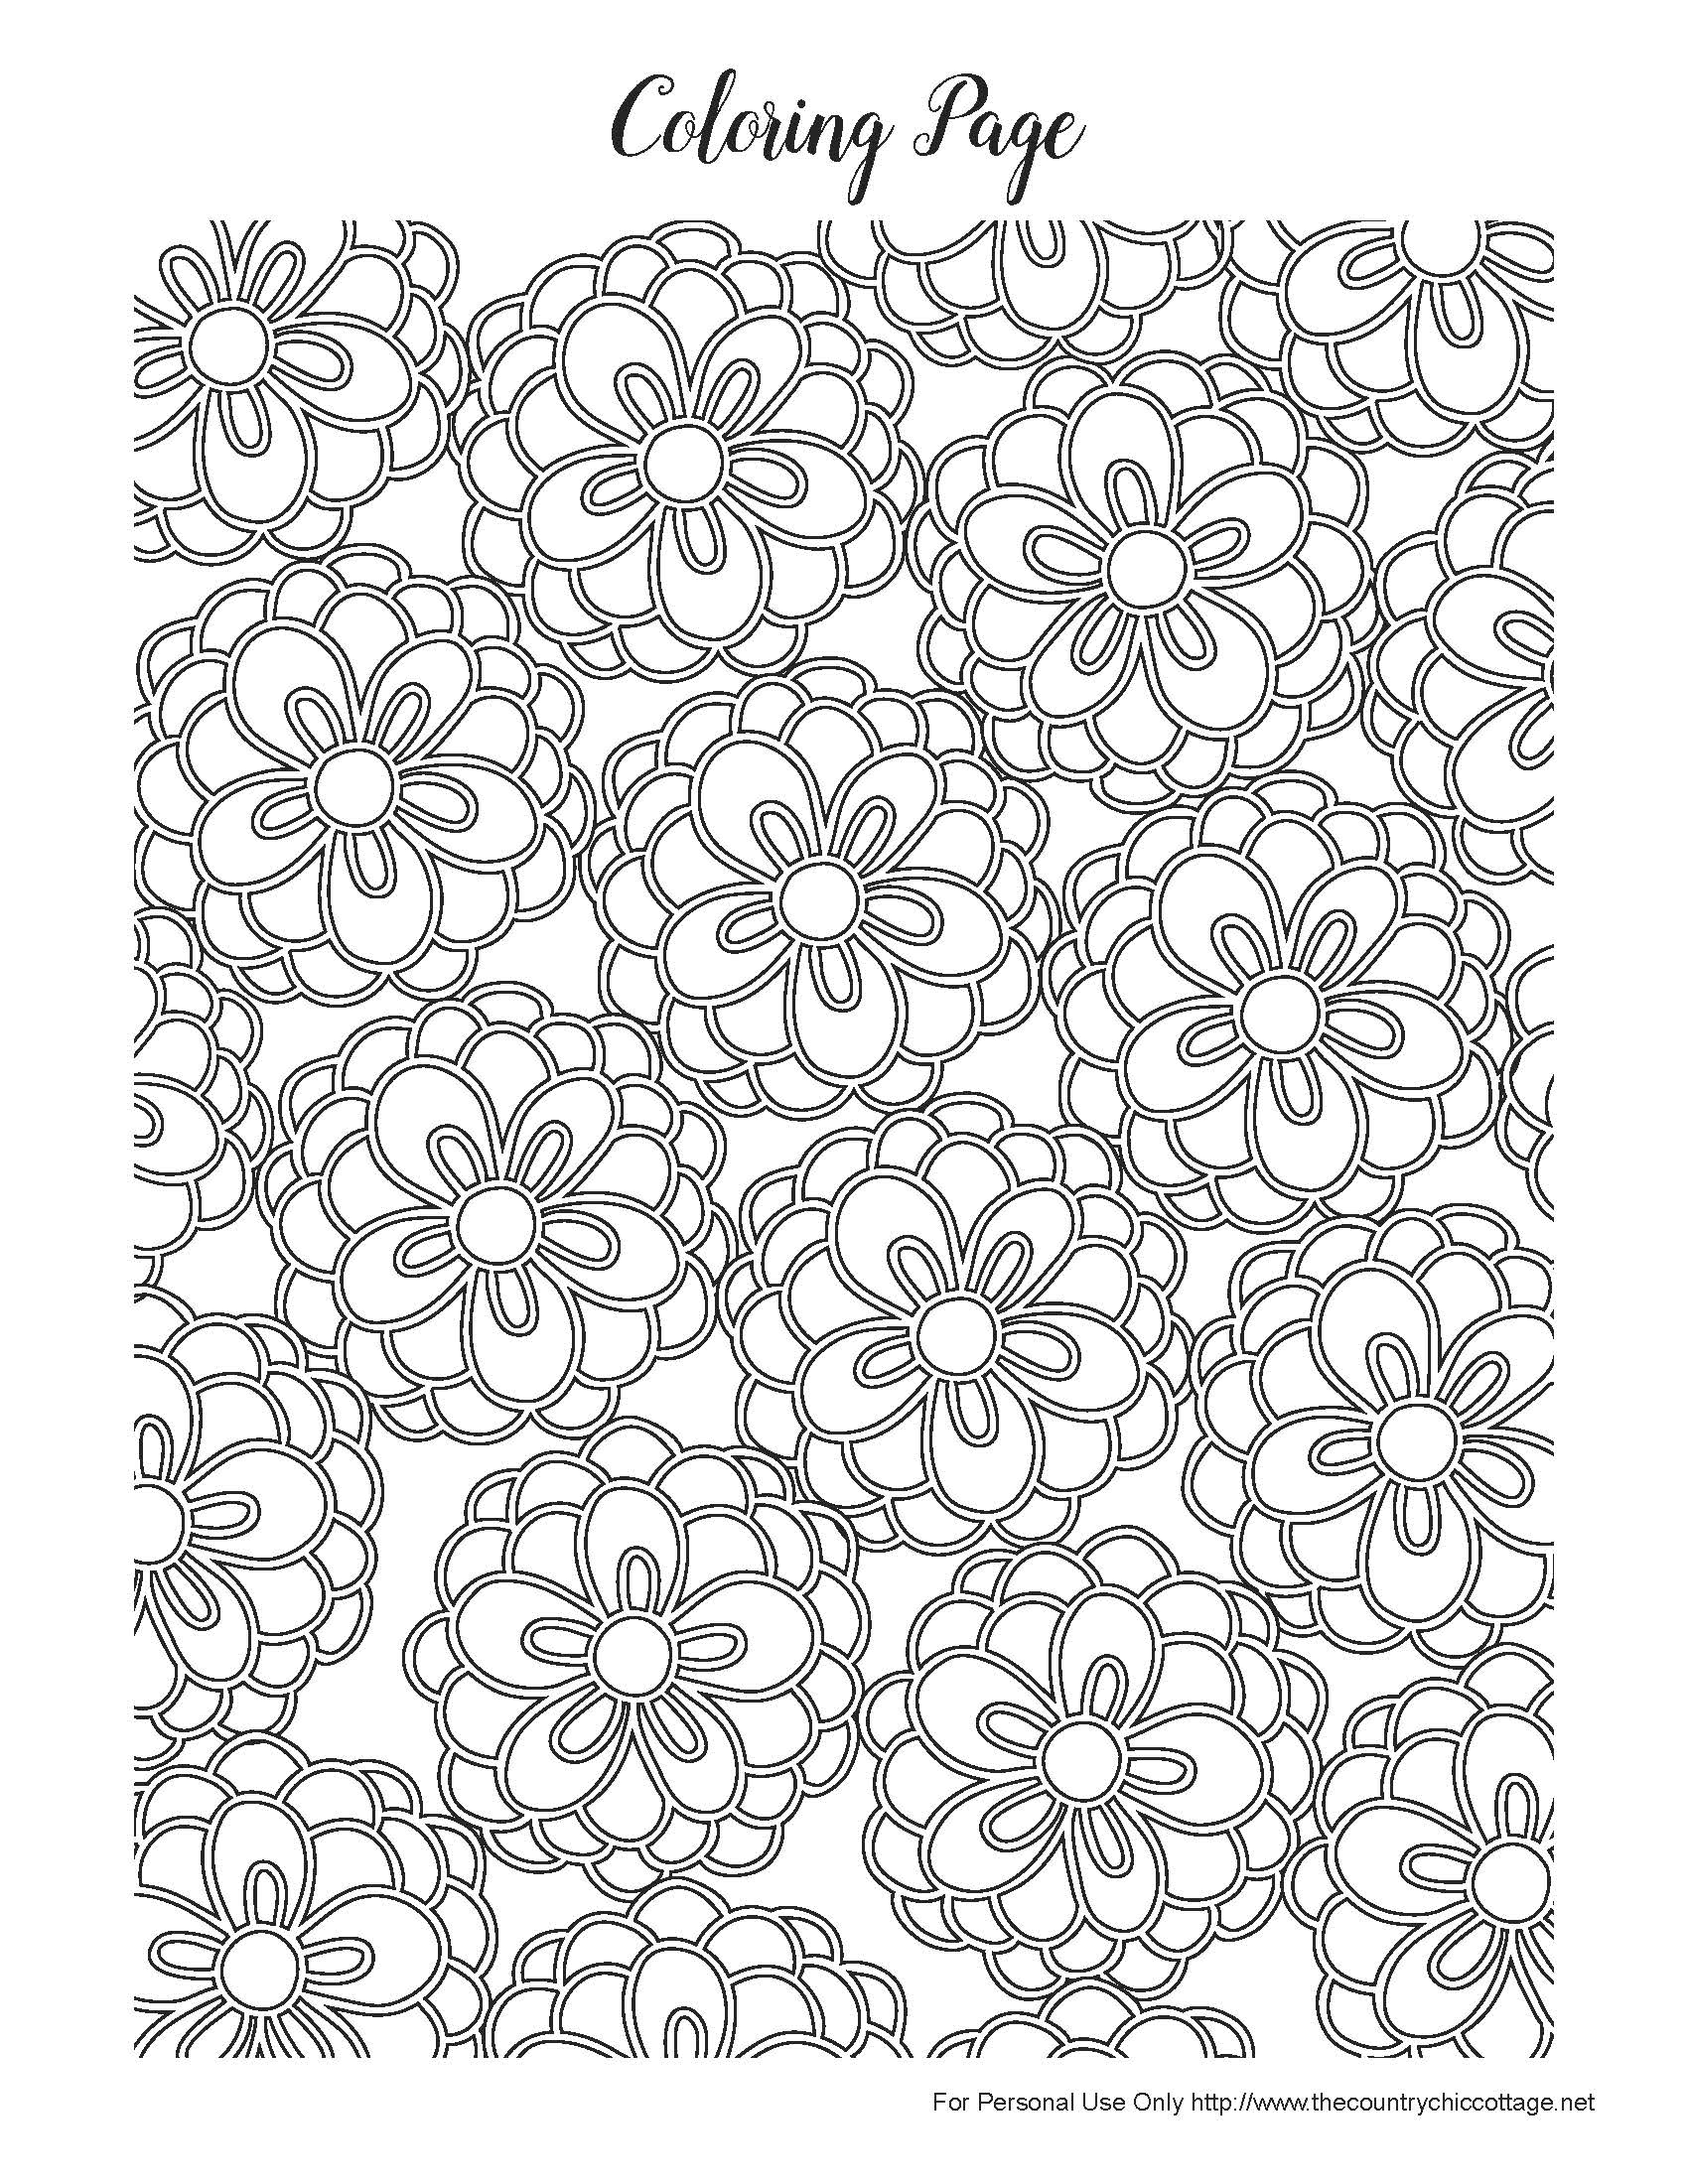 Download Free Spring Coloring Pages for Adults - The Country Chic Cottage